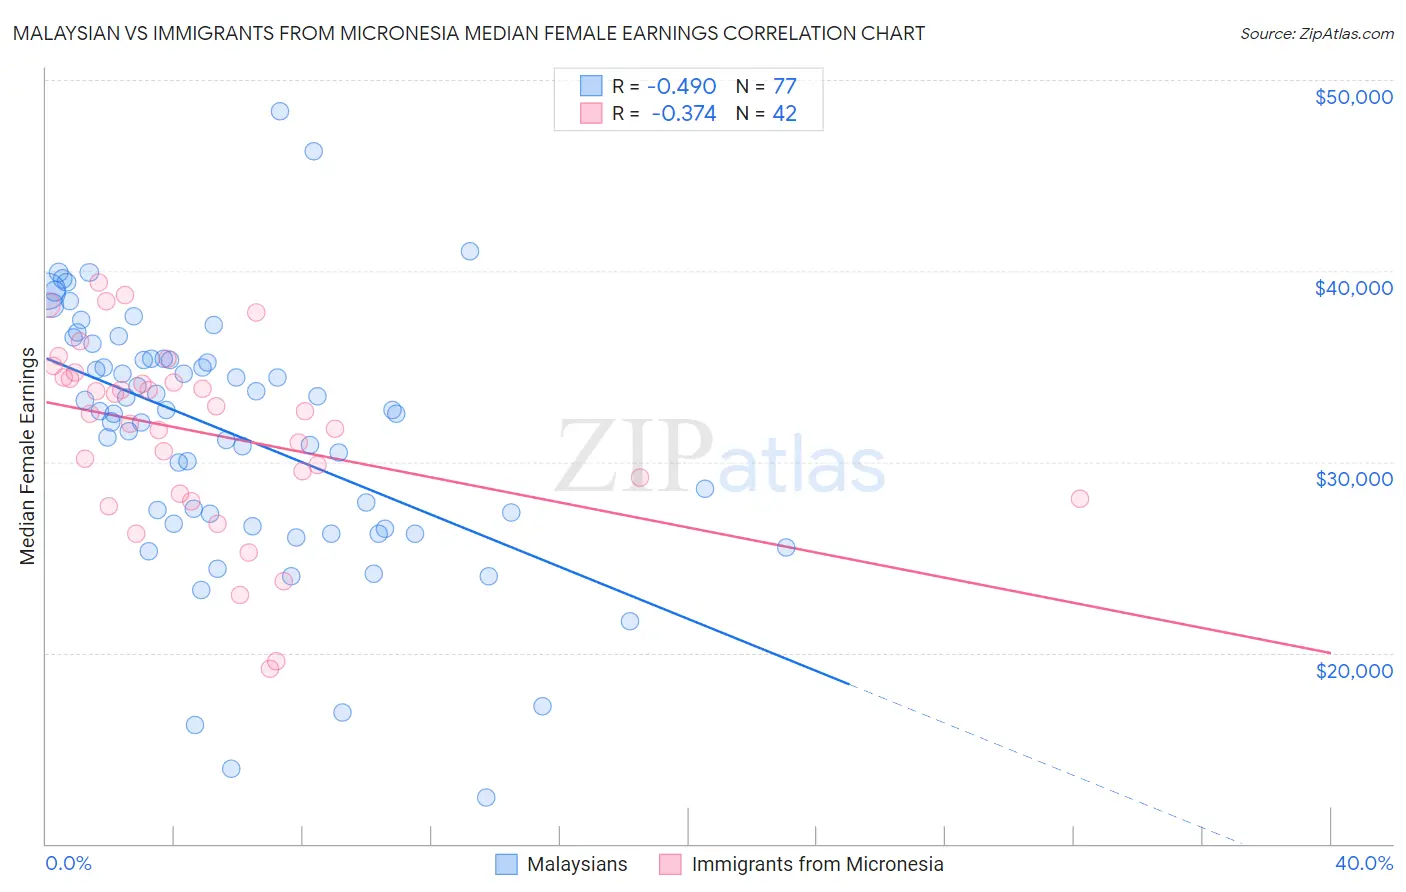 Malaysian vs Immigrants from Micronesia Median Female Earnings